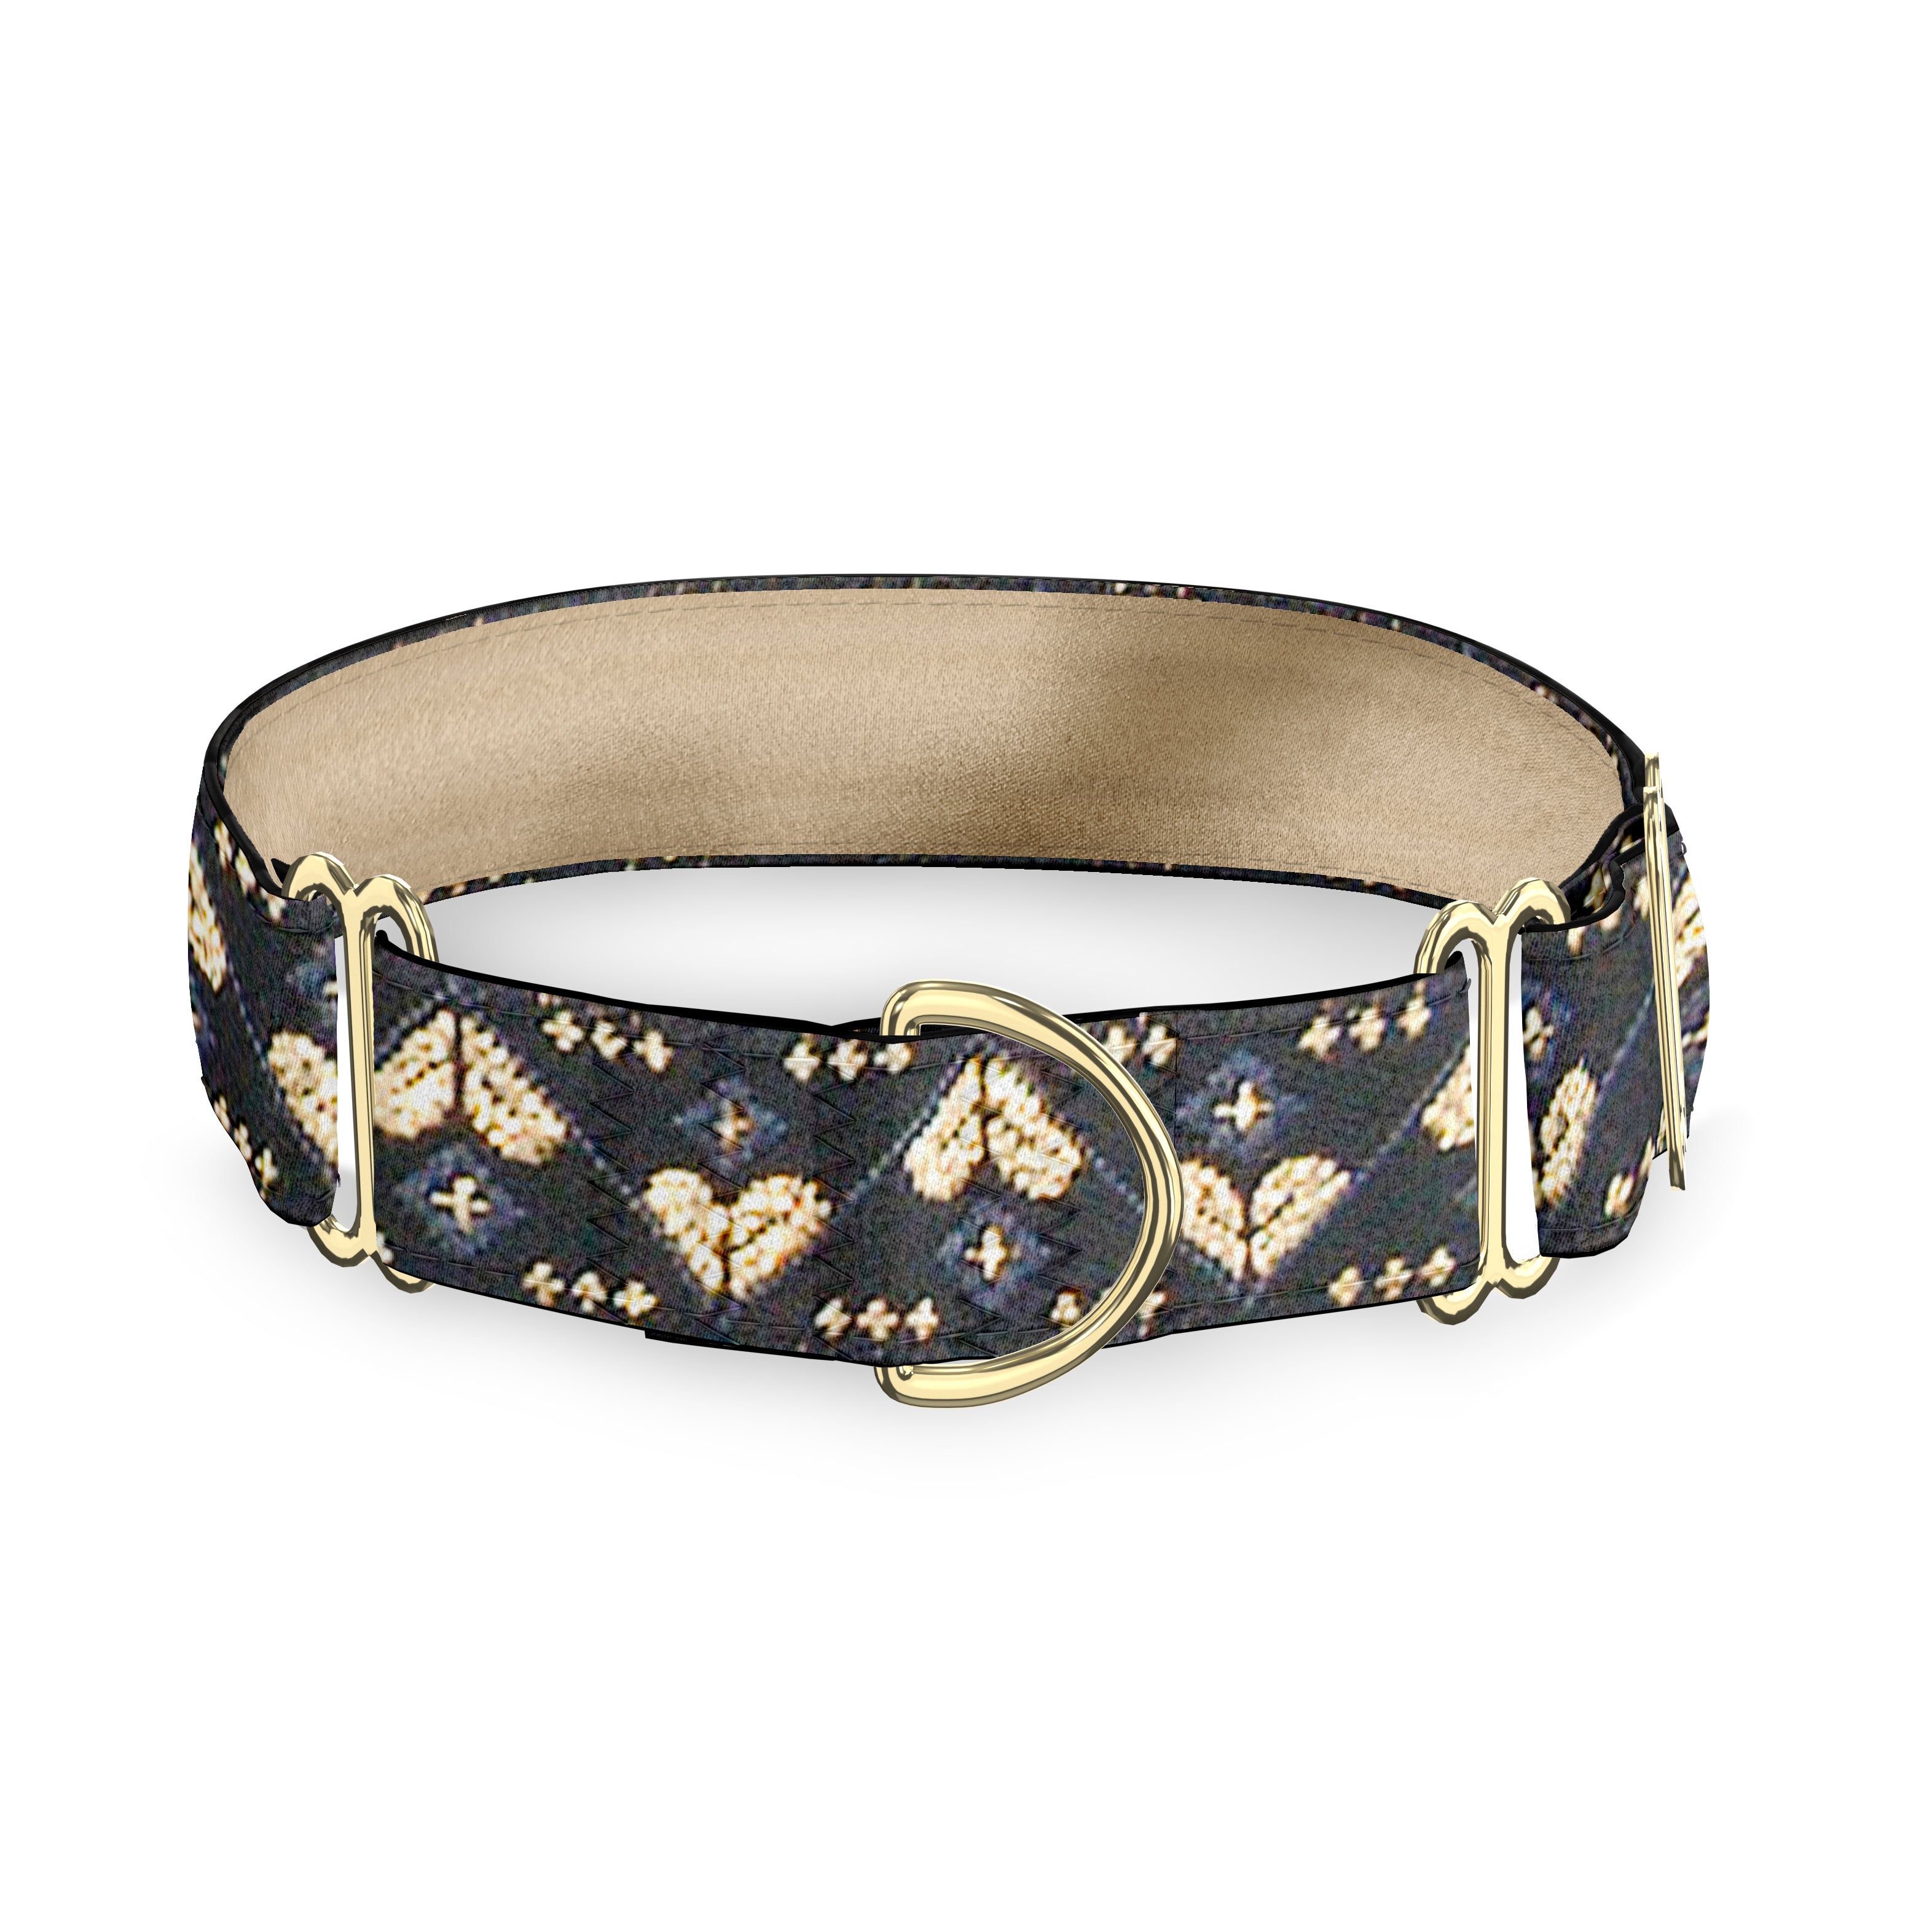 Hearts Hex Black and Gold 5/8' Dog Collar